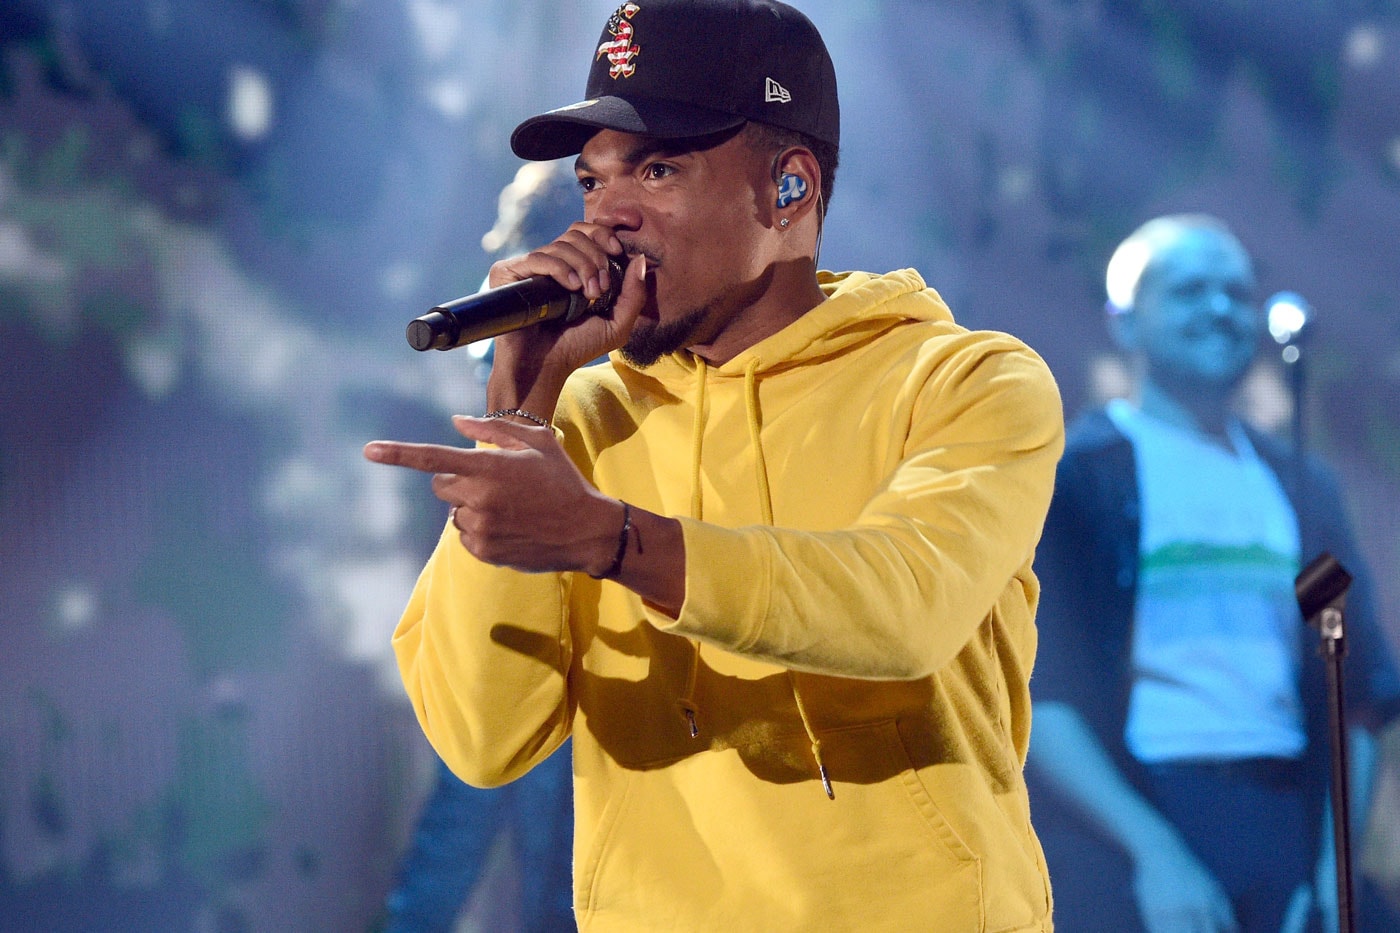 Chance the Rapper Special Olympics Concert 50 Anniversary